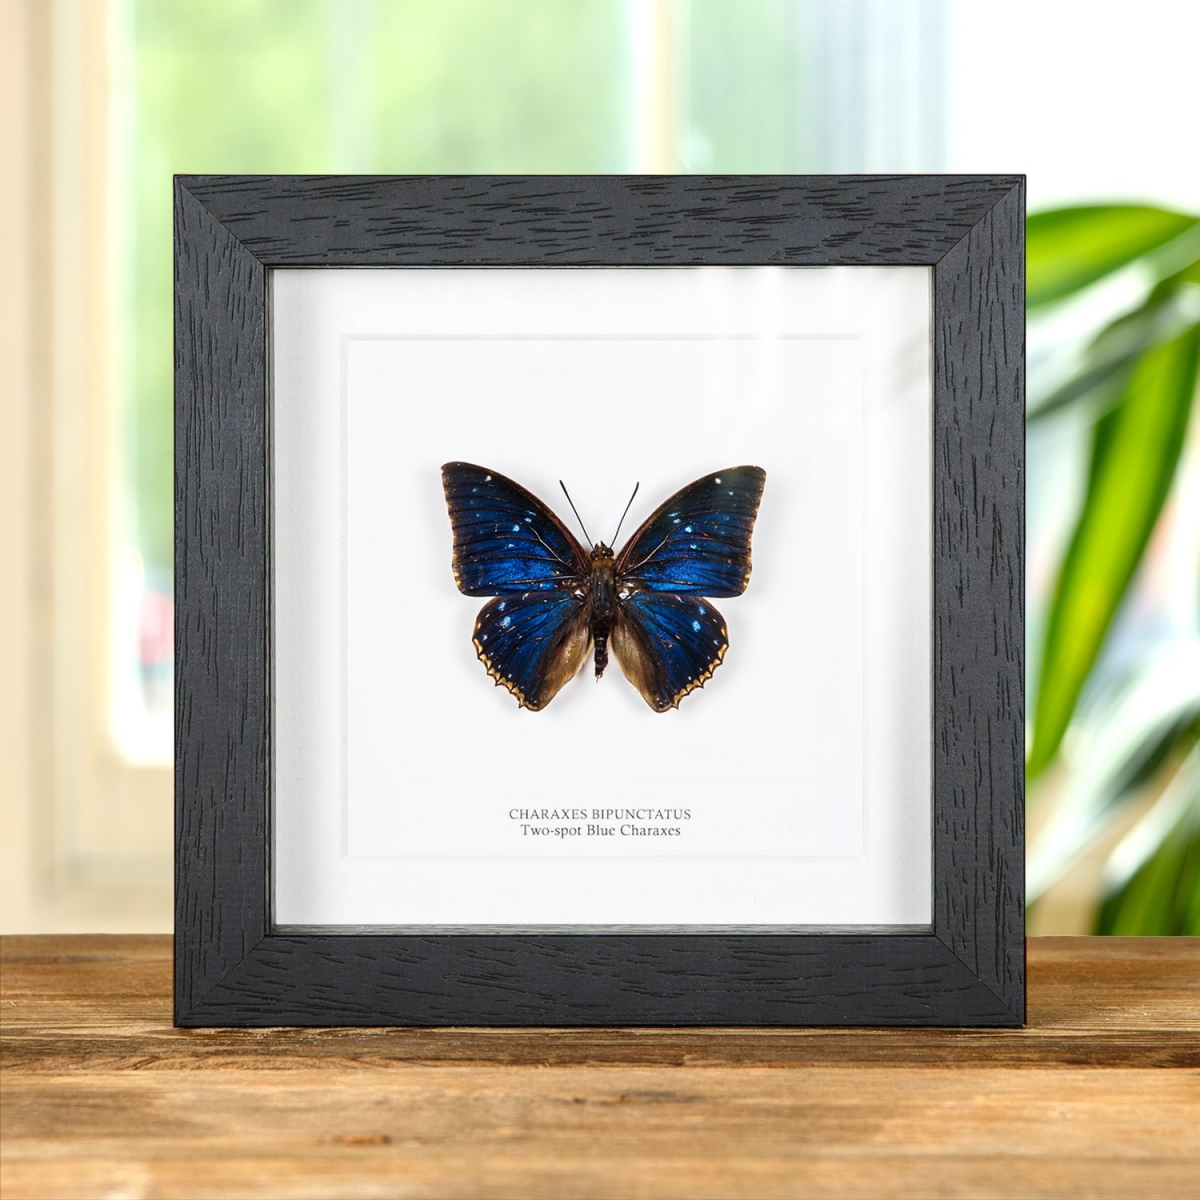 Minibeast Two-spot Blue Charaxes Butterfly In Box Frame (Charaxes bipunctatus)